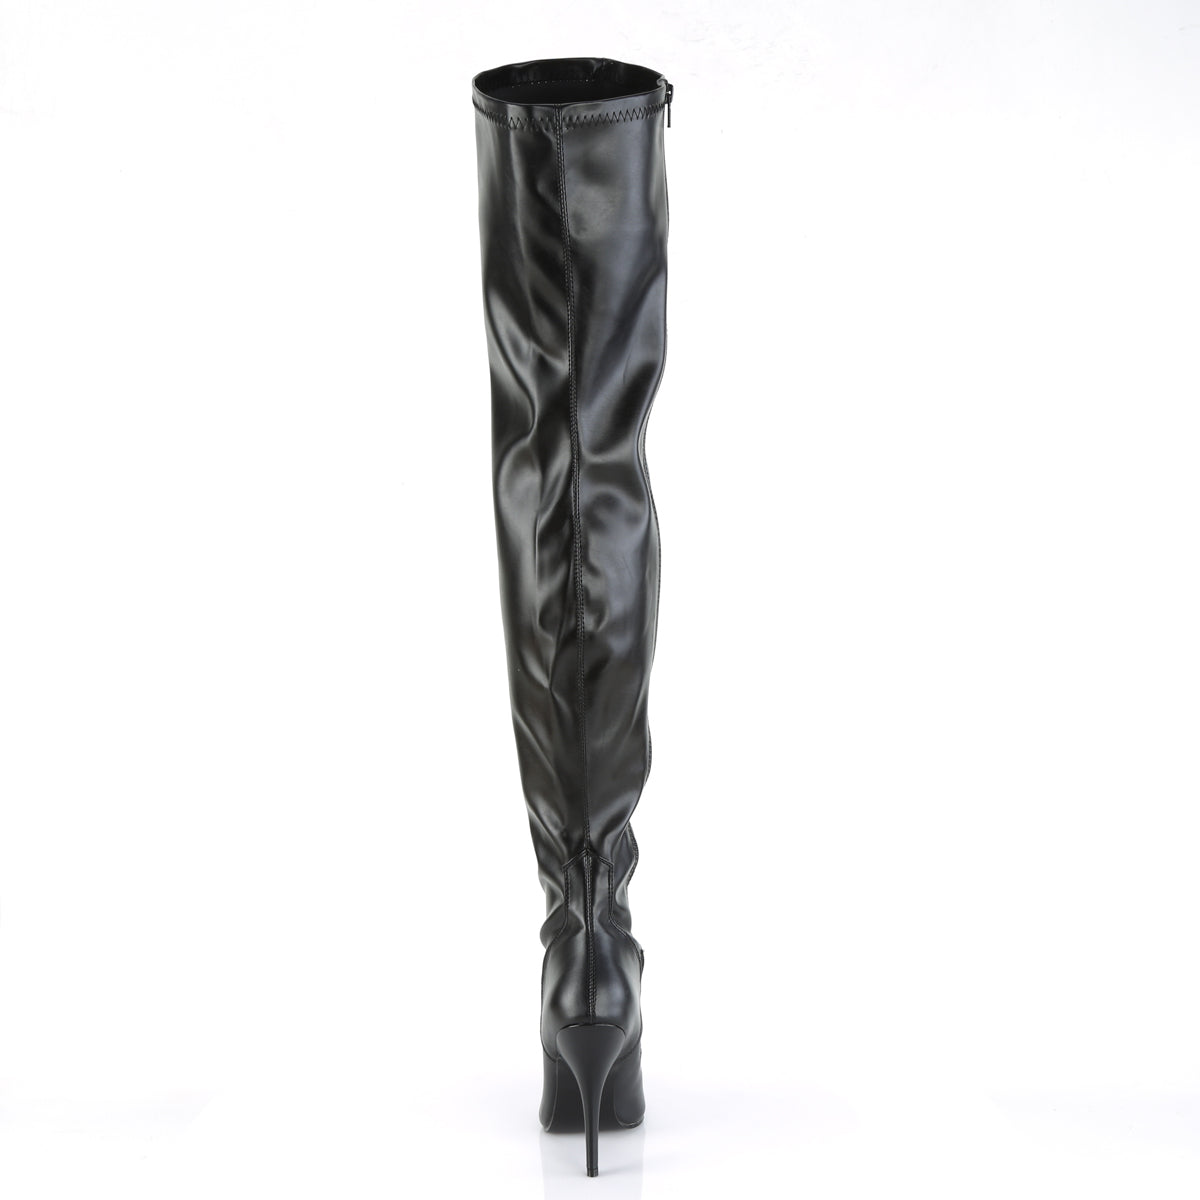 SEDUCE-3000/B/PU 5" PLEASER FAST DELIVERY 24-48h